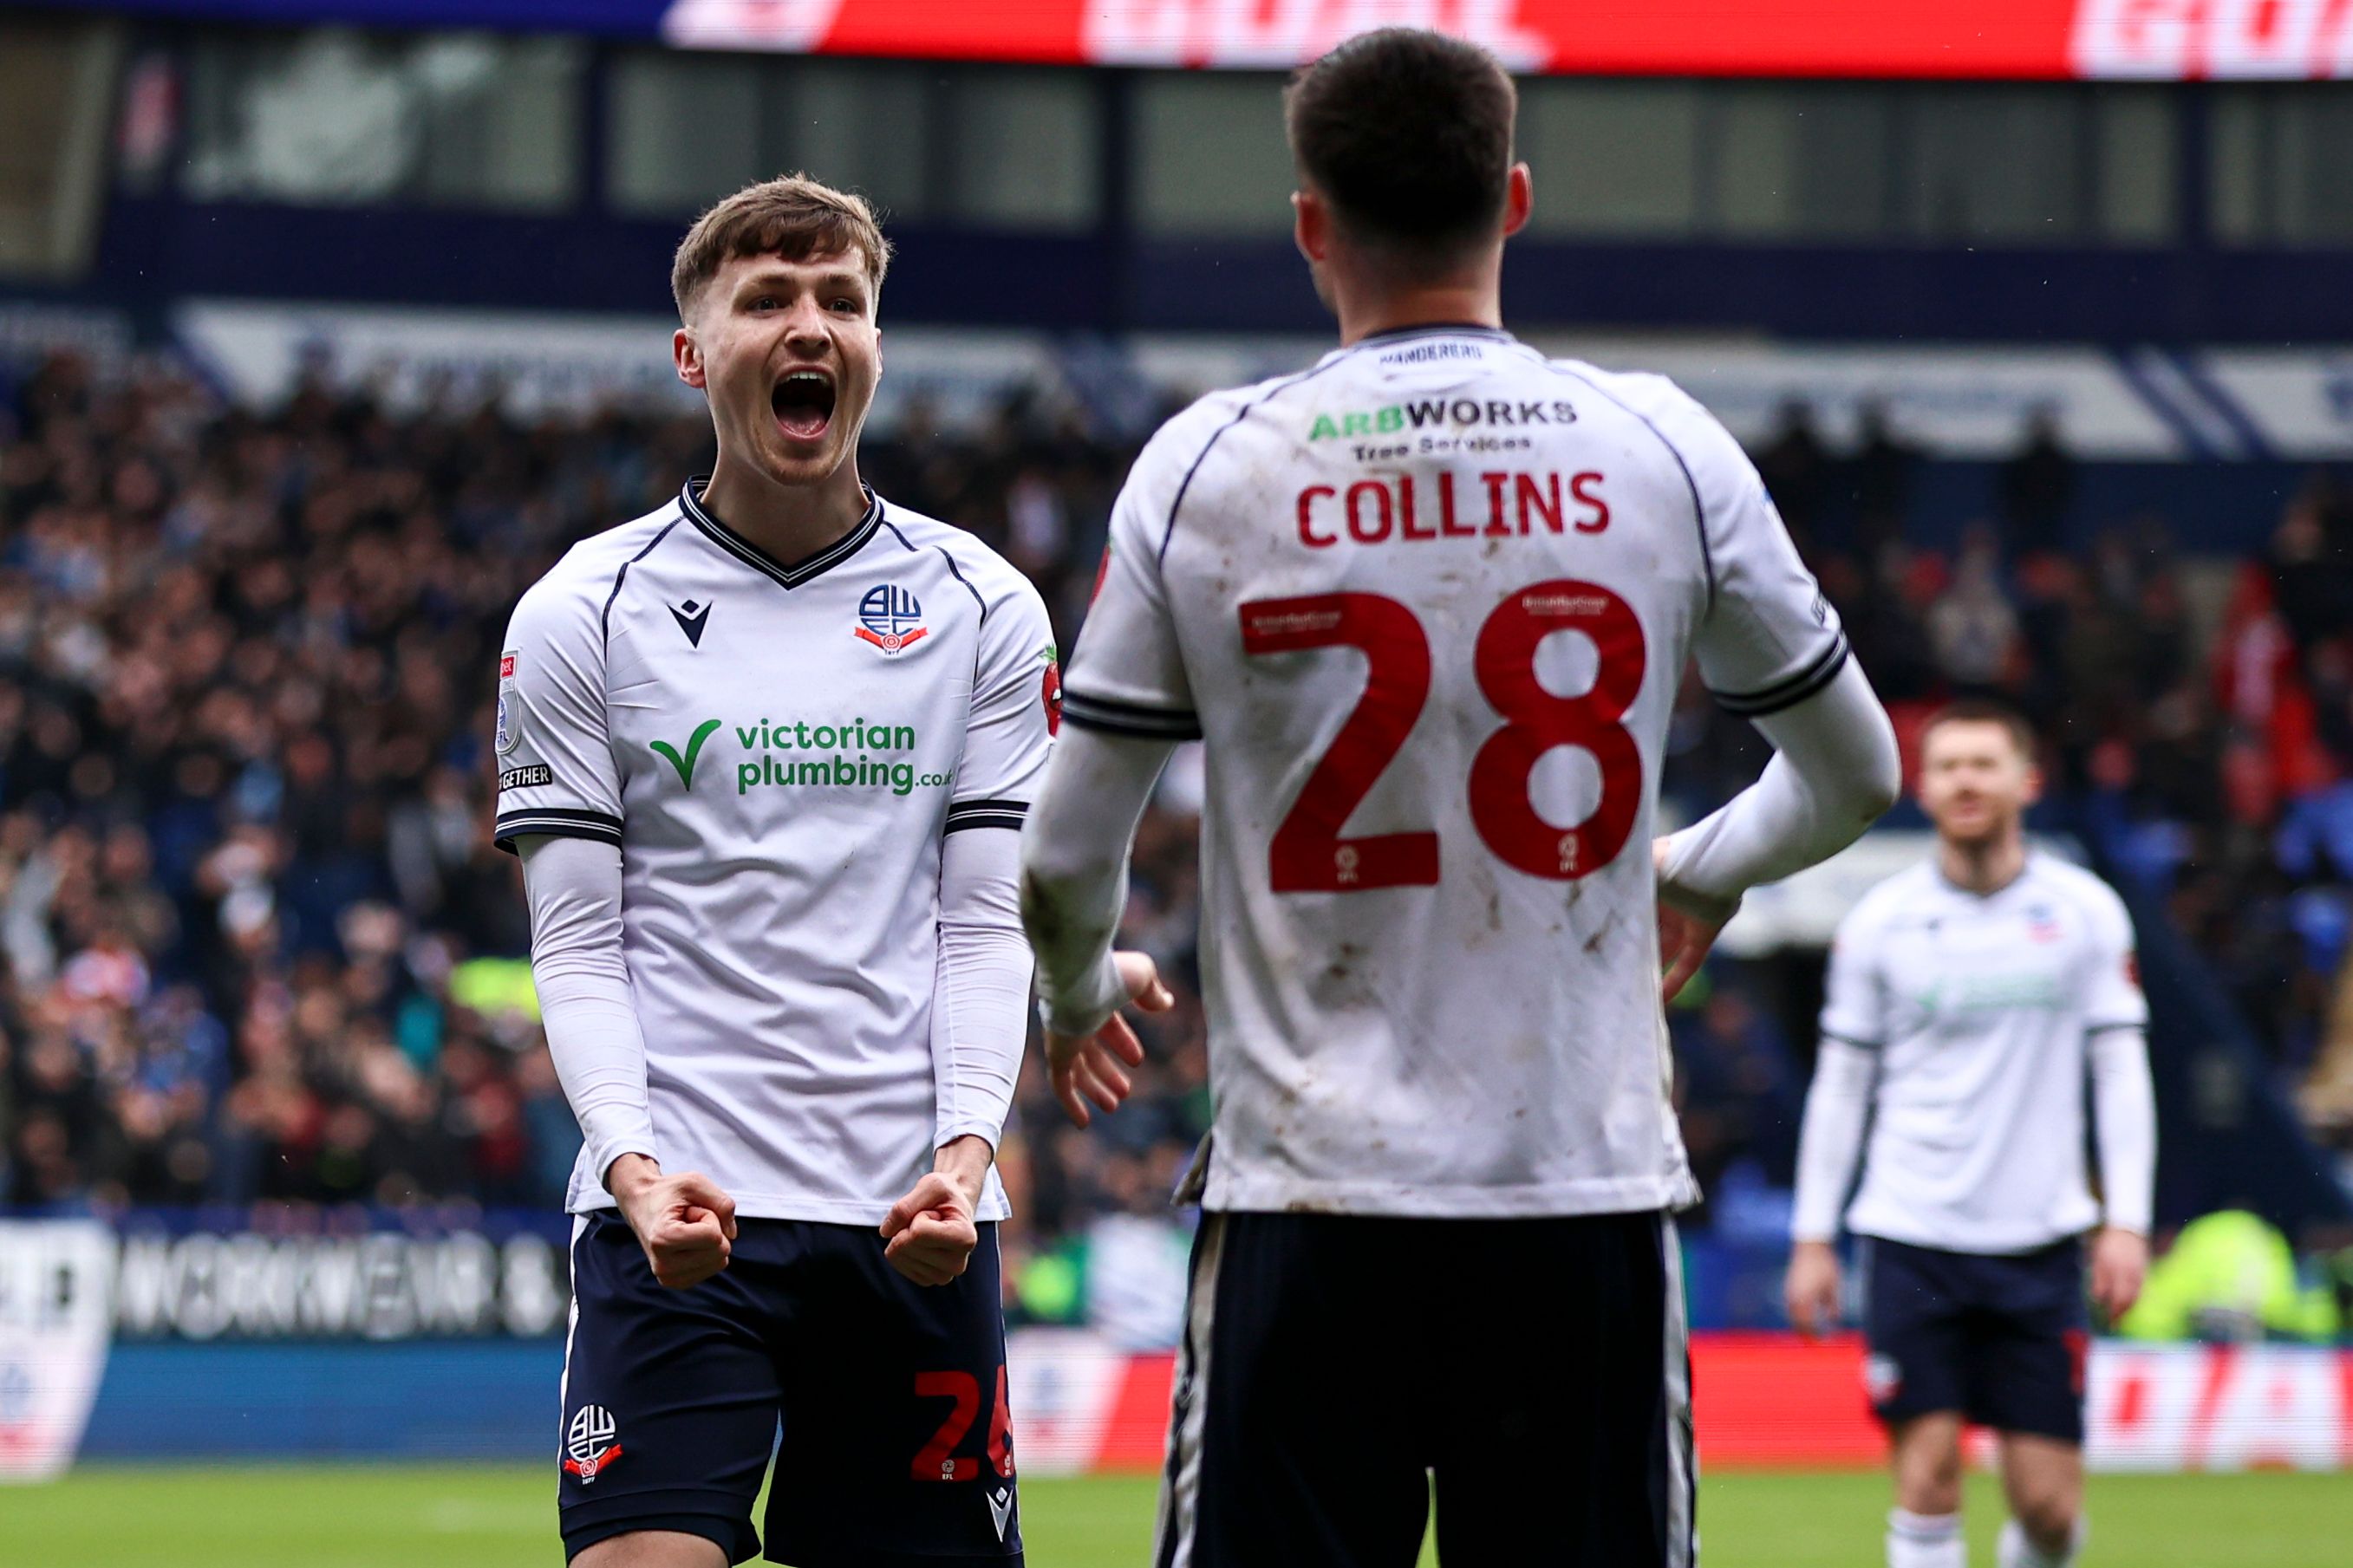 Zac Ashworth celebrates a Bolton goal with a team-mate while wearing Bolton's home shirt